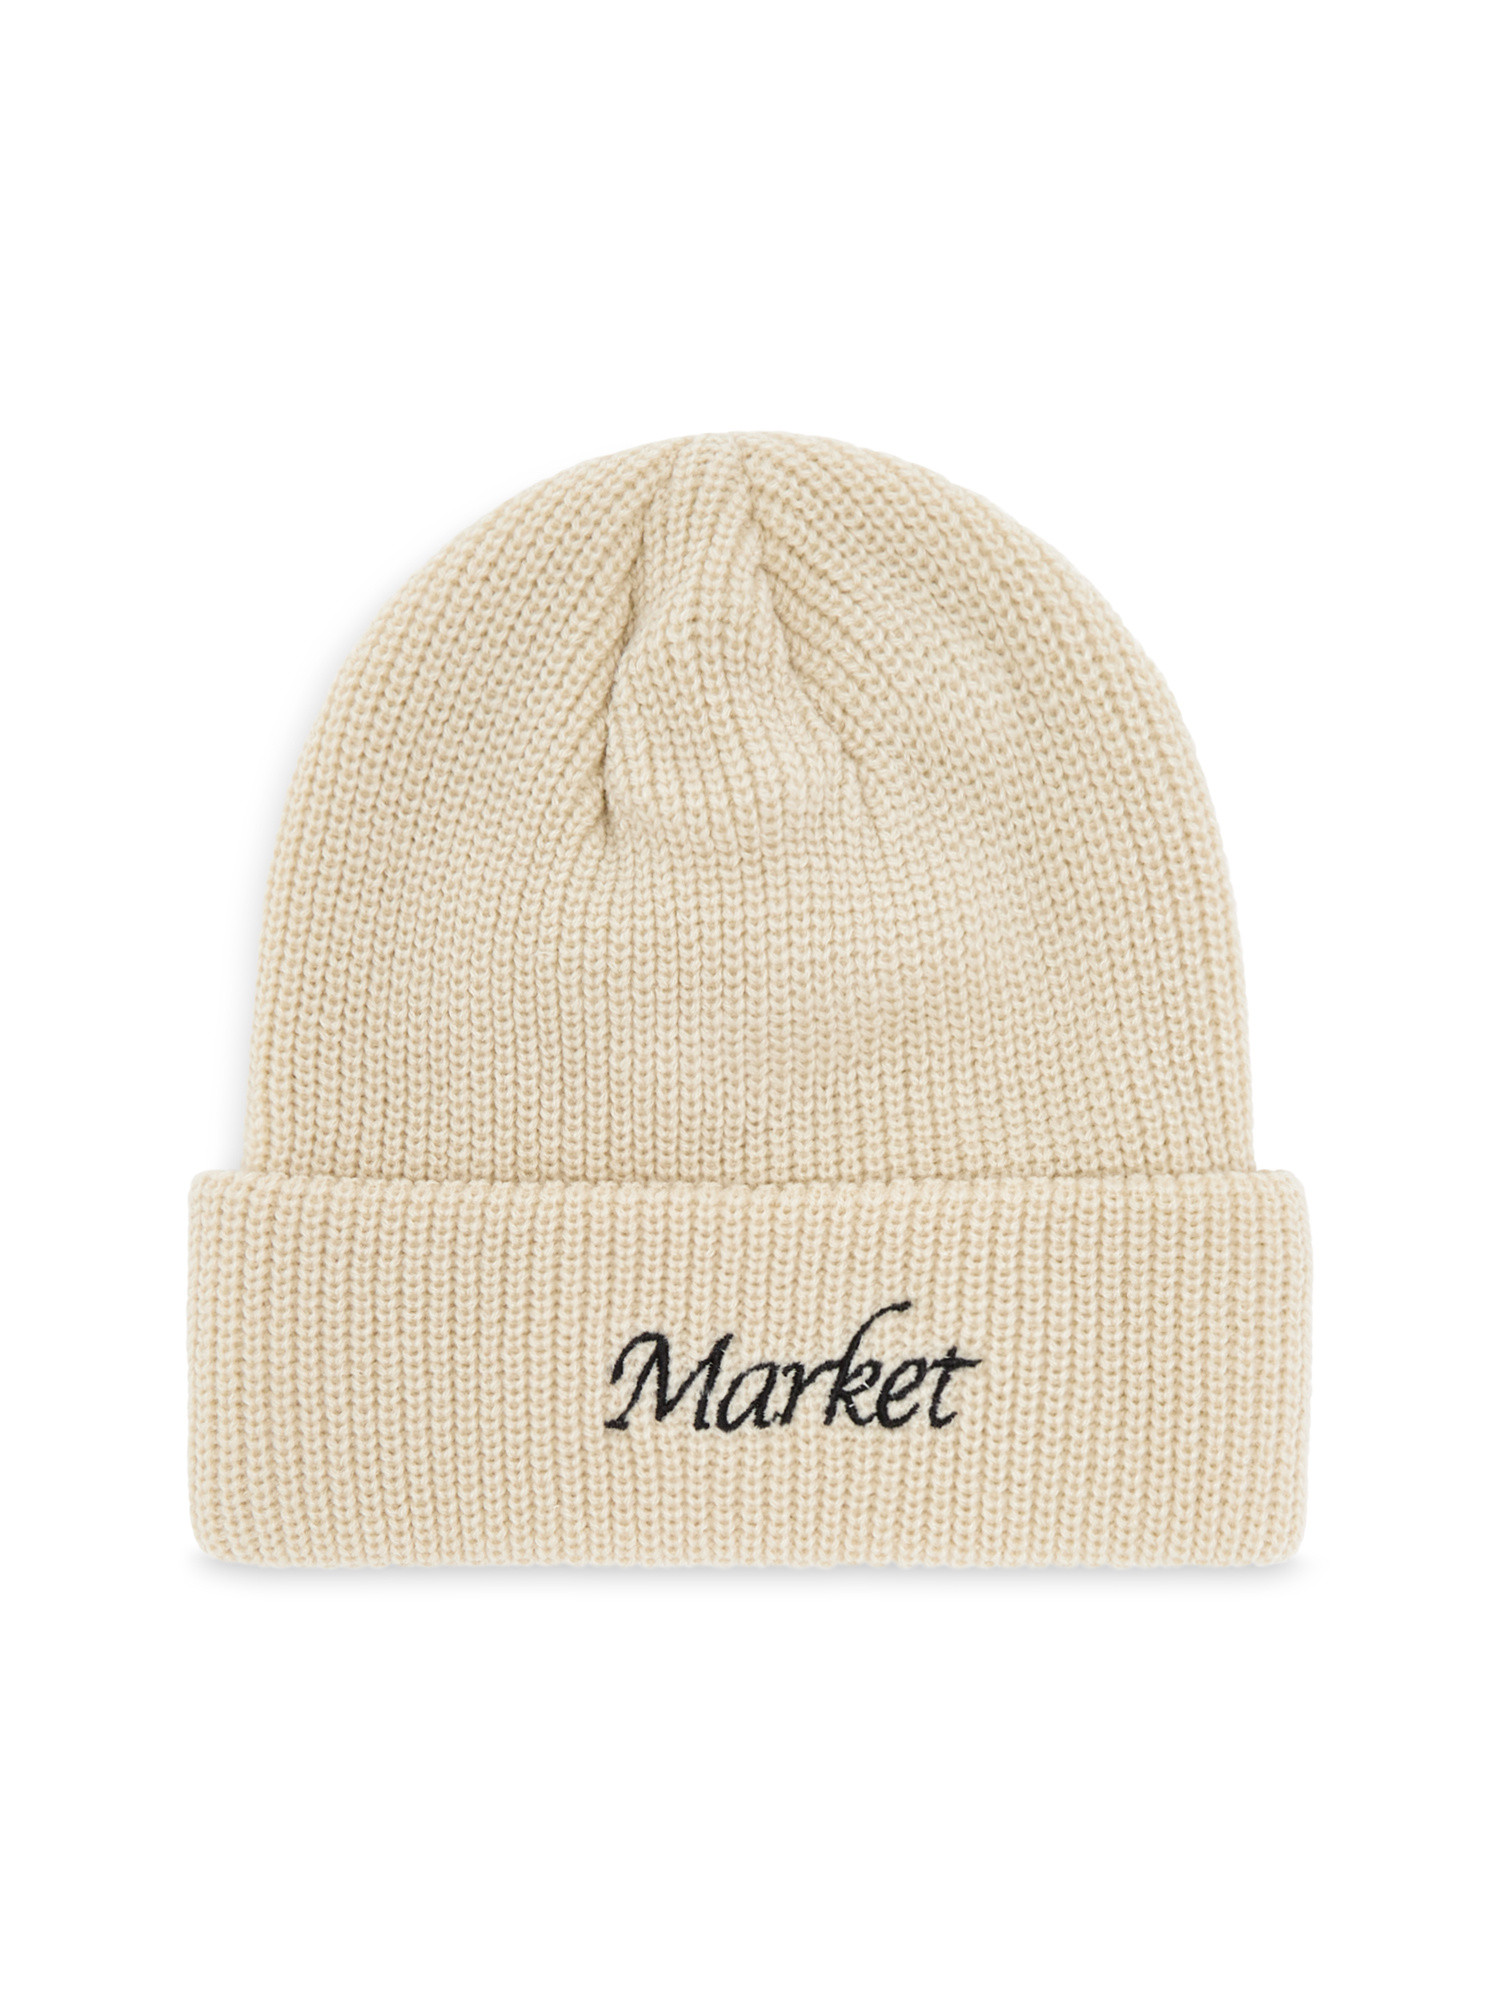 Market - Smiley® upside down beanie, Off White, large image number 0